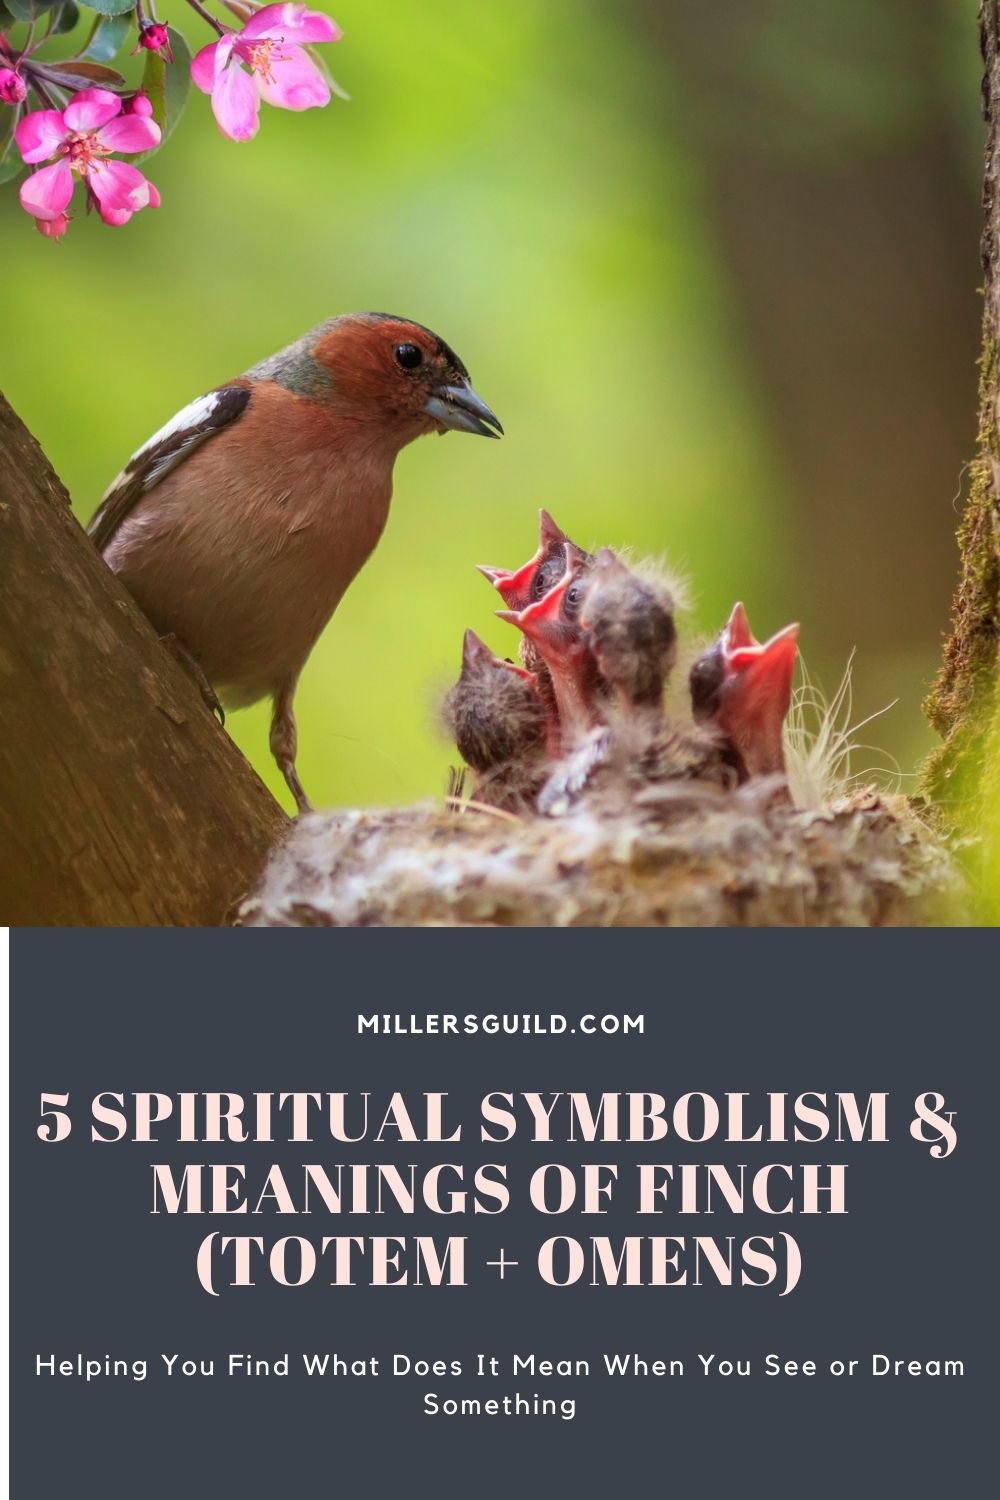 5 Spiritual Symbolism & Meanings of Finch (Totem + Omens) 4